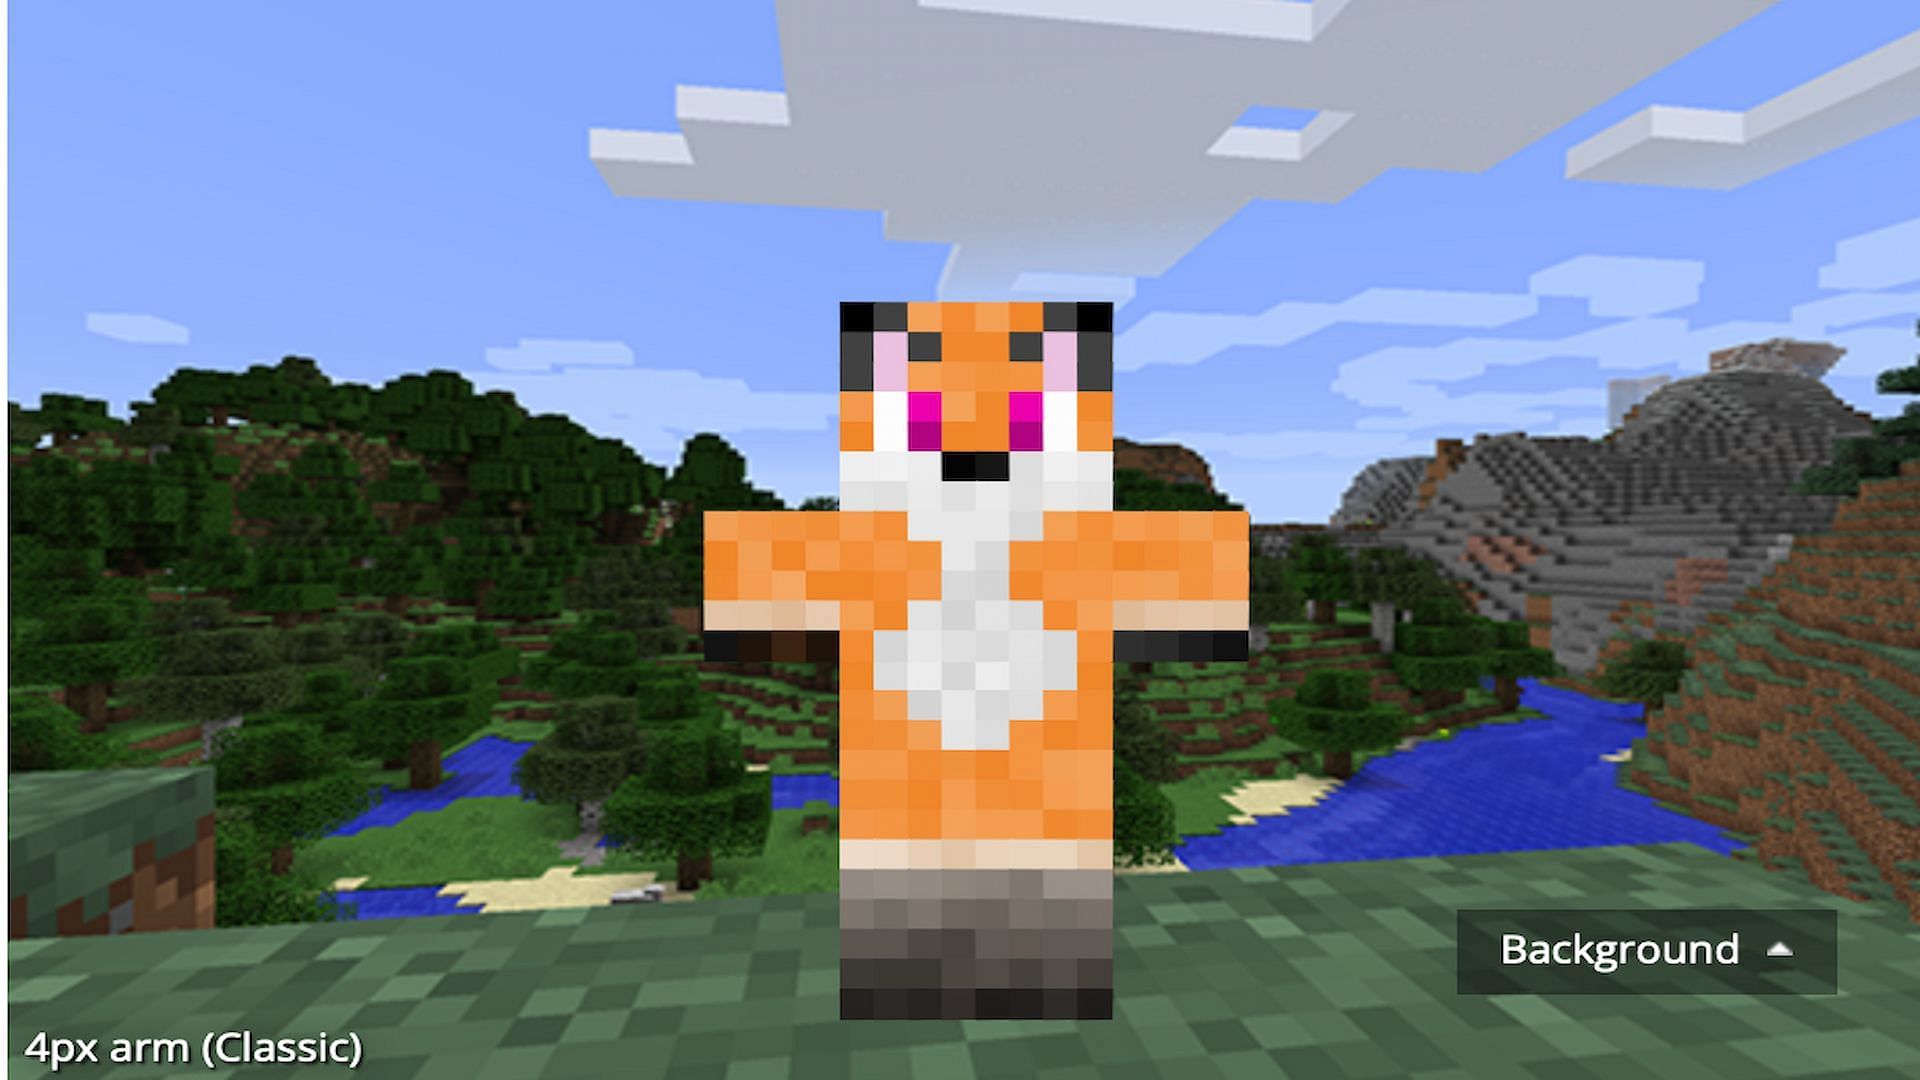 Well a nice IBXTOYCAT skin exclusively on the education edition